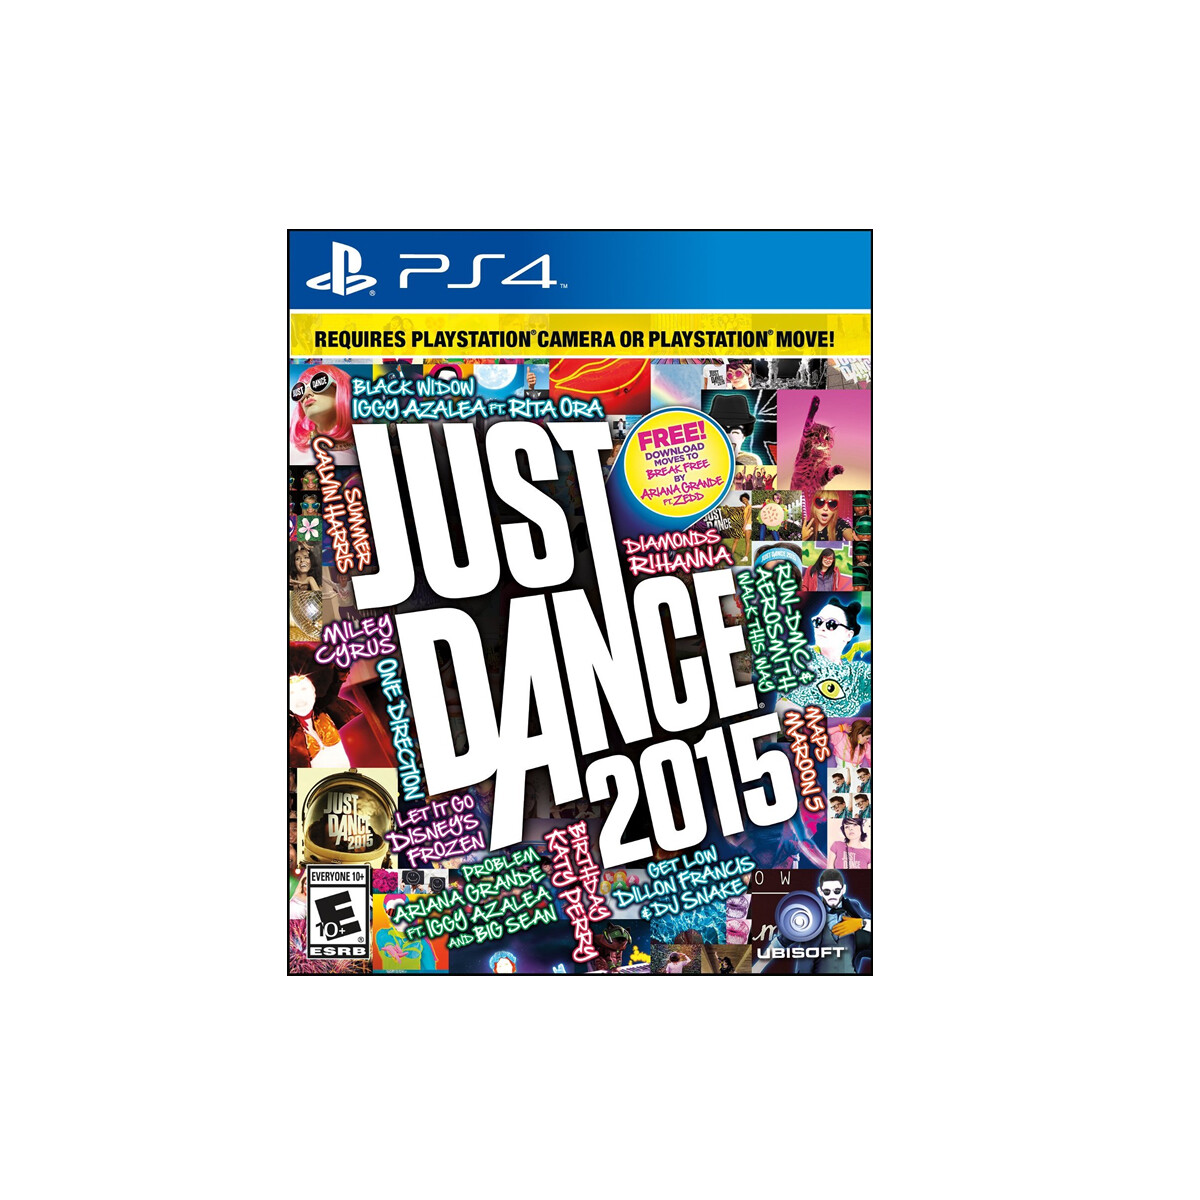 PS4 JUST DANCE 2015 